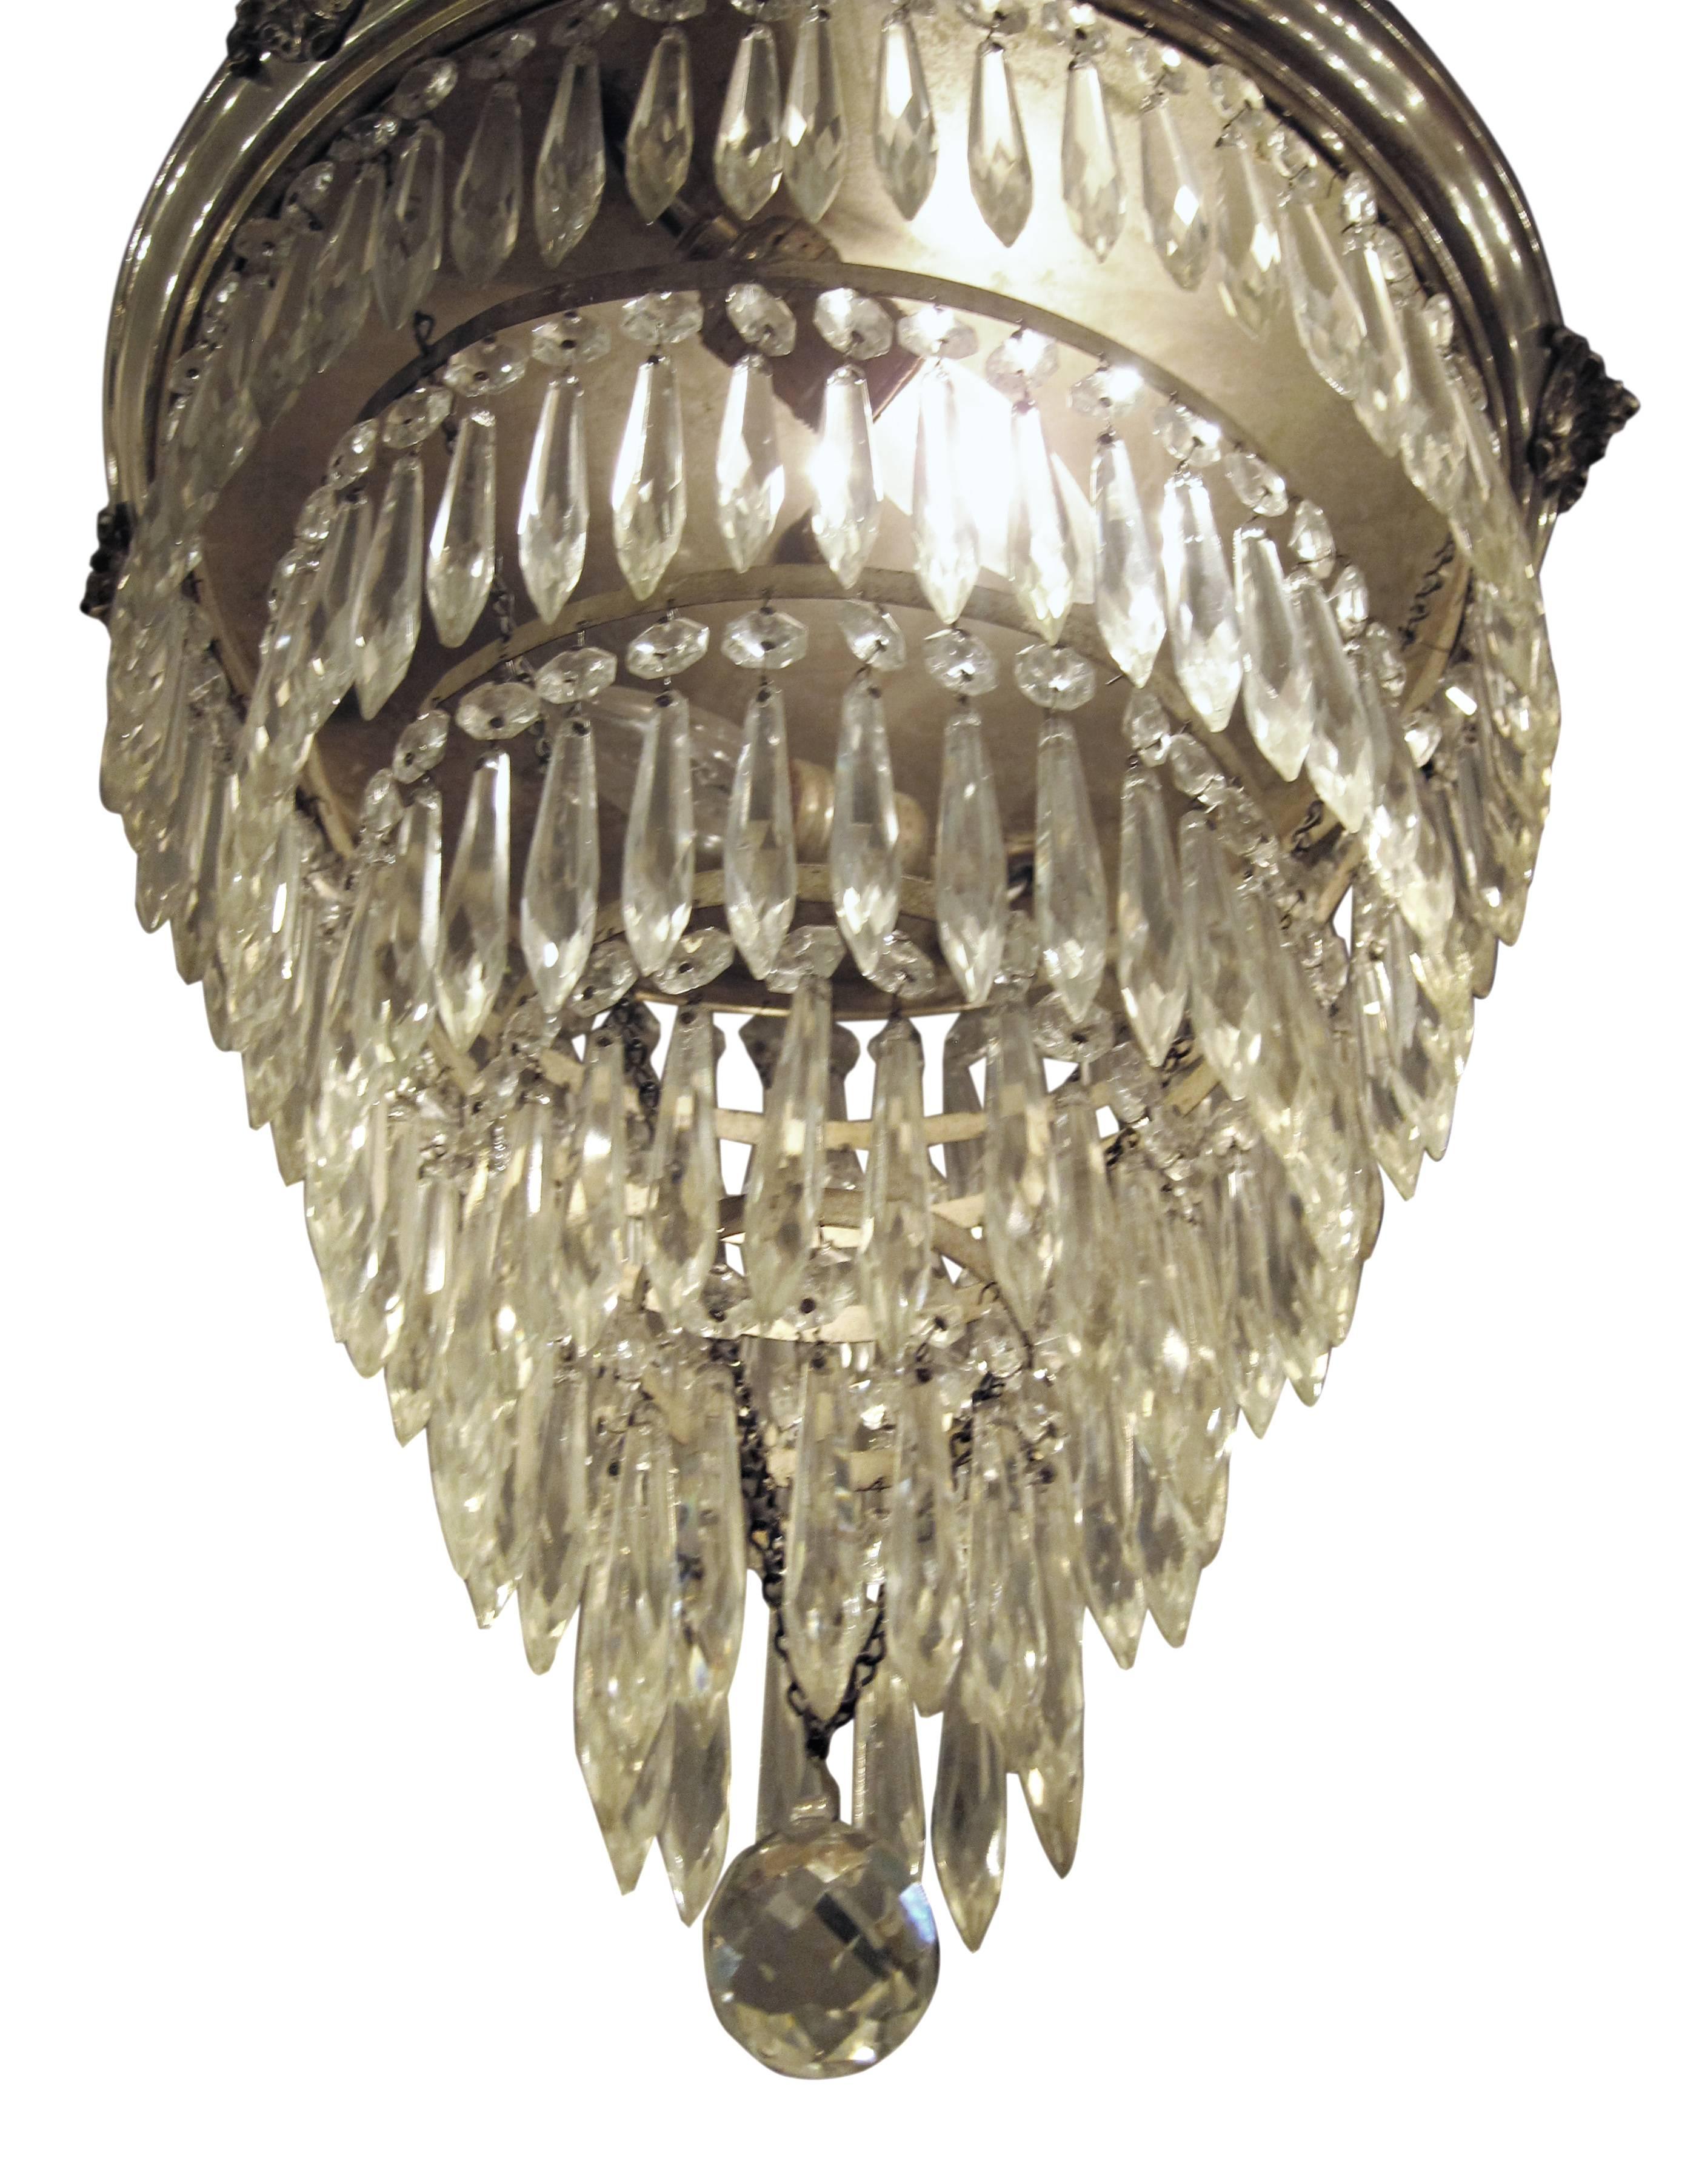 1920s silver plated crystal wedding cake flush mount chandelier with five tiers. This item can be viewed at our 149 Madison Avenue location in Manhattan.